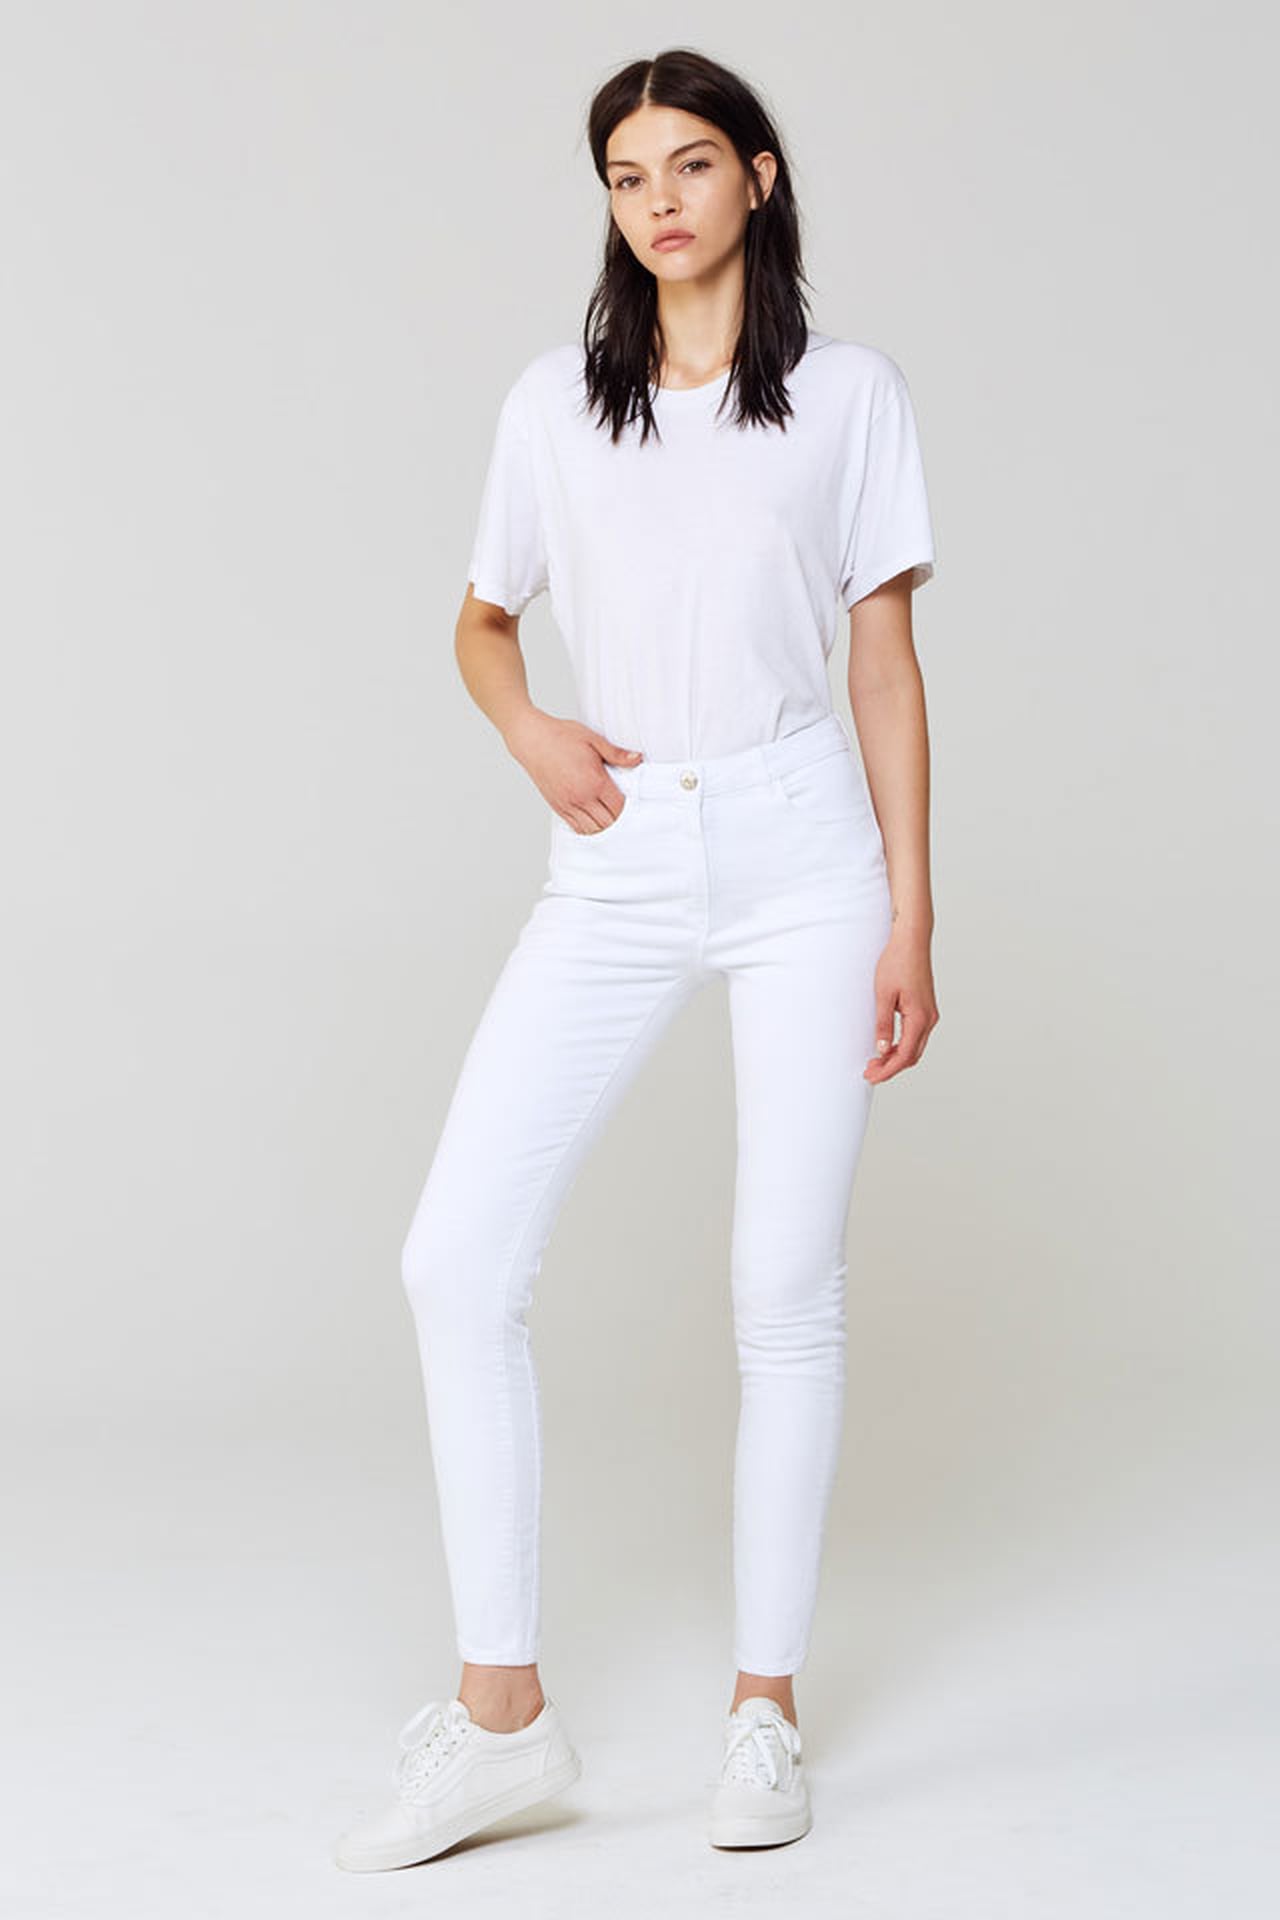 How to Find the Perfect White Jeans | POPSUGAR Fashion